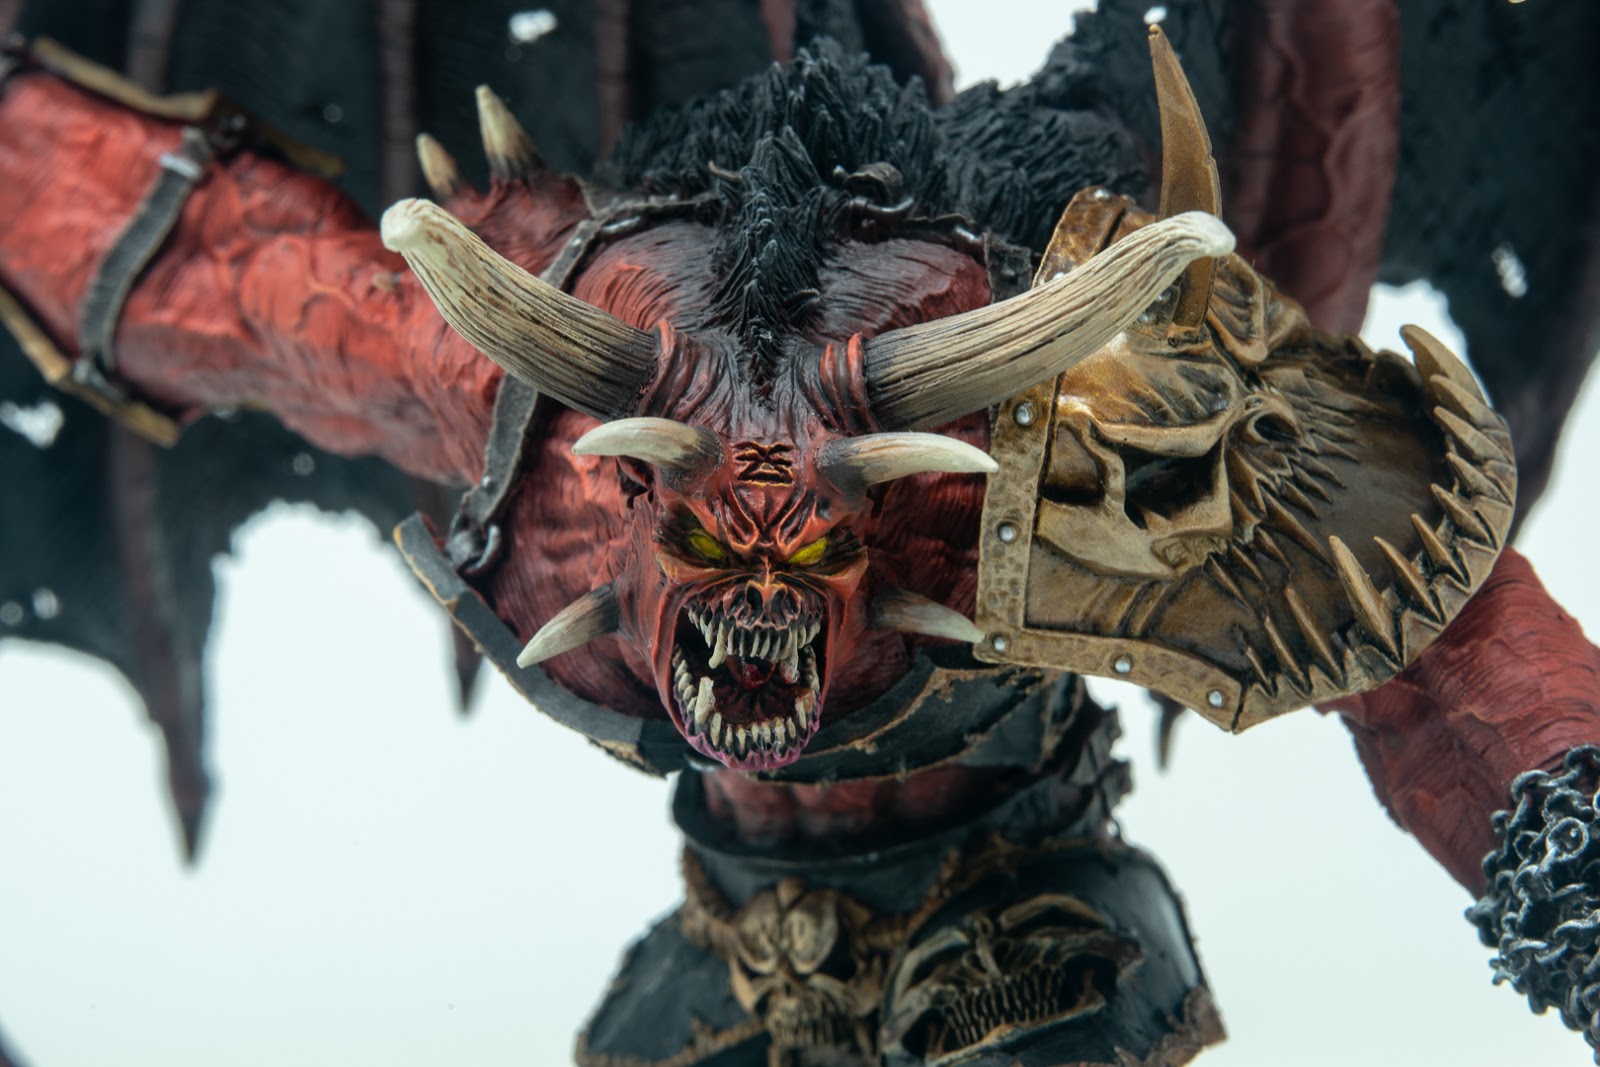 Showcase: Forge World Bloodthirster An’ggrath the Unbound by Silvernome.